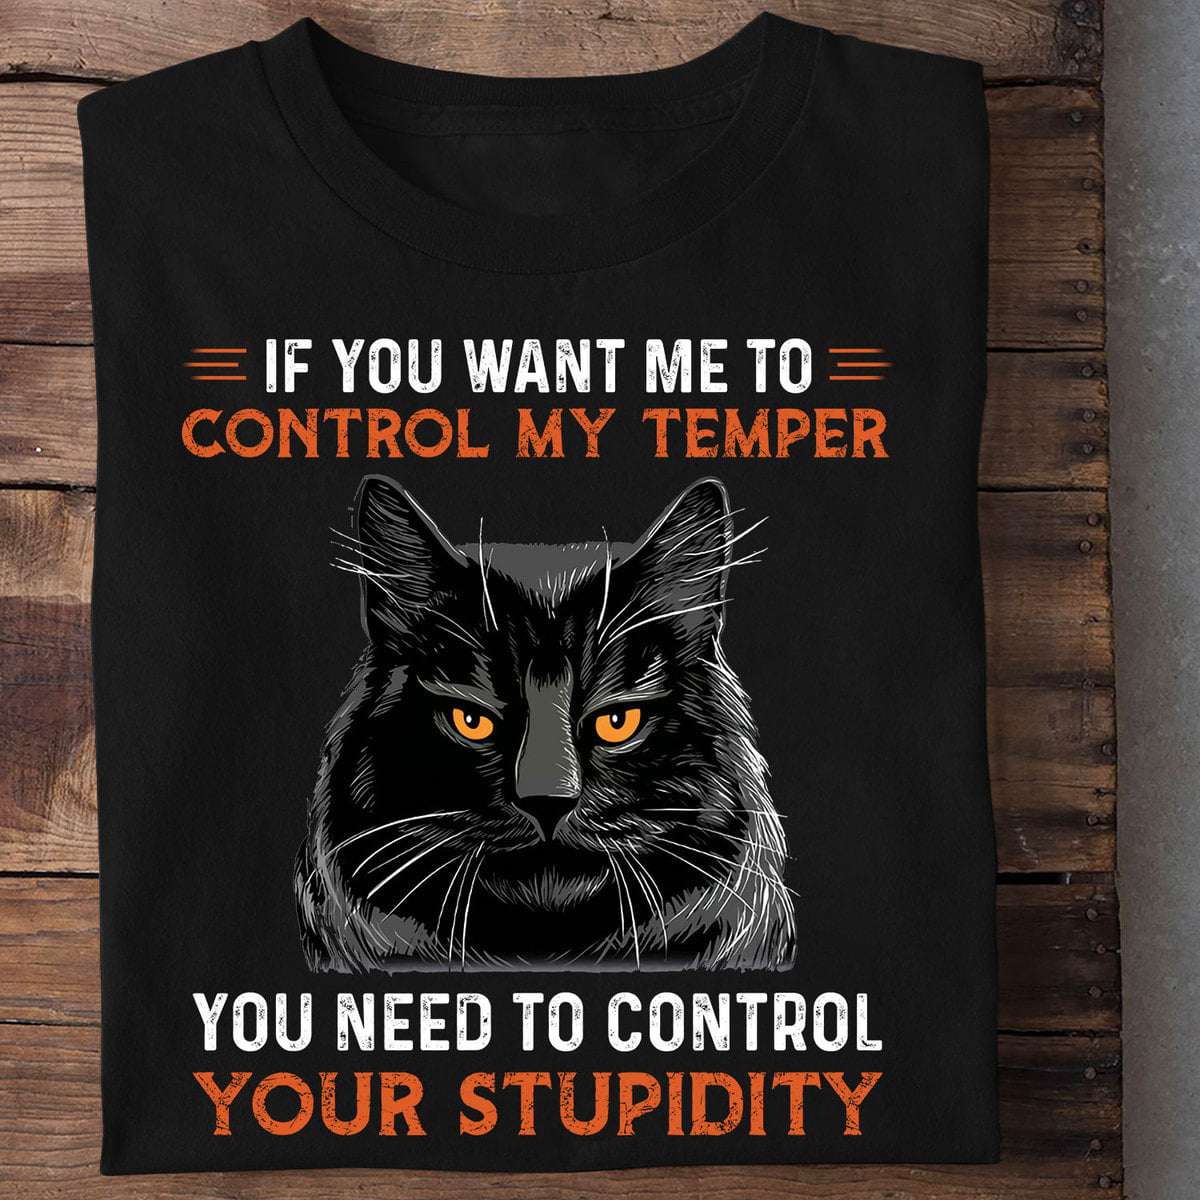 If you want me to control my temper, you need to control your stupidity - Black cat, gift for cat lover